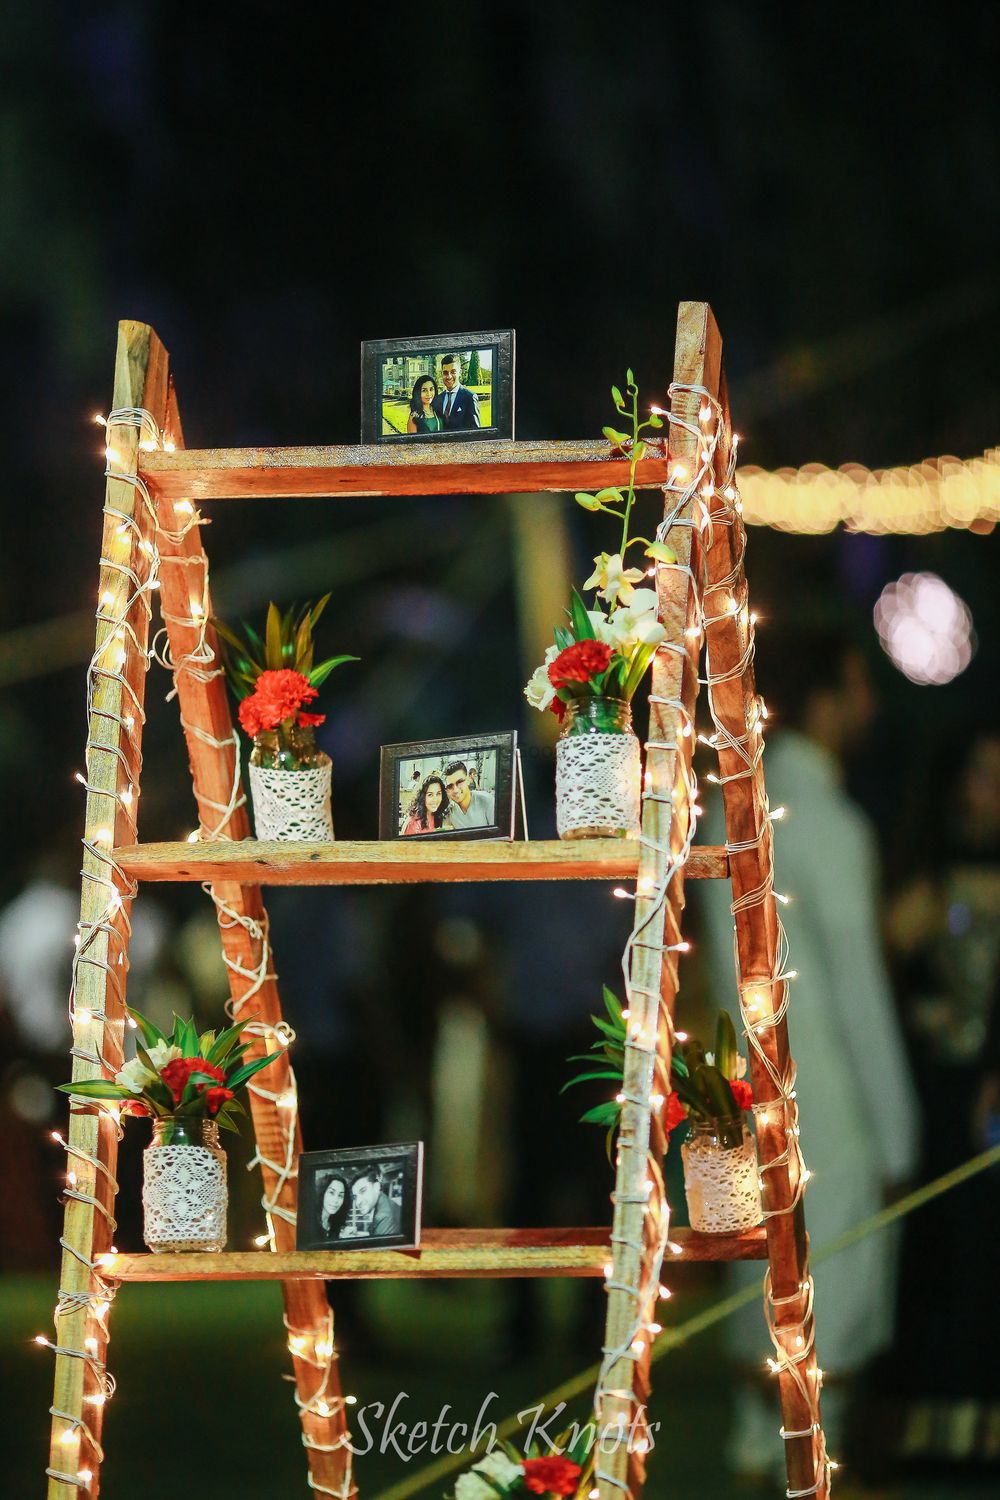 Photo of Wooden ladder in decor with lights and personalized elements